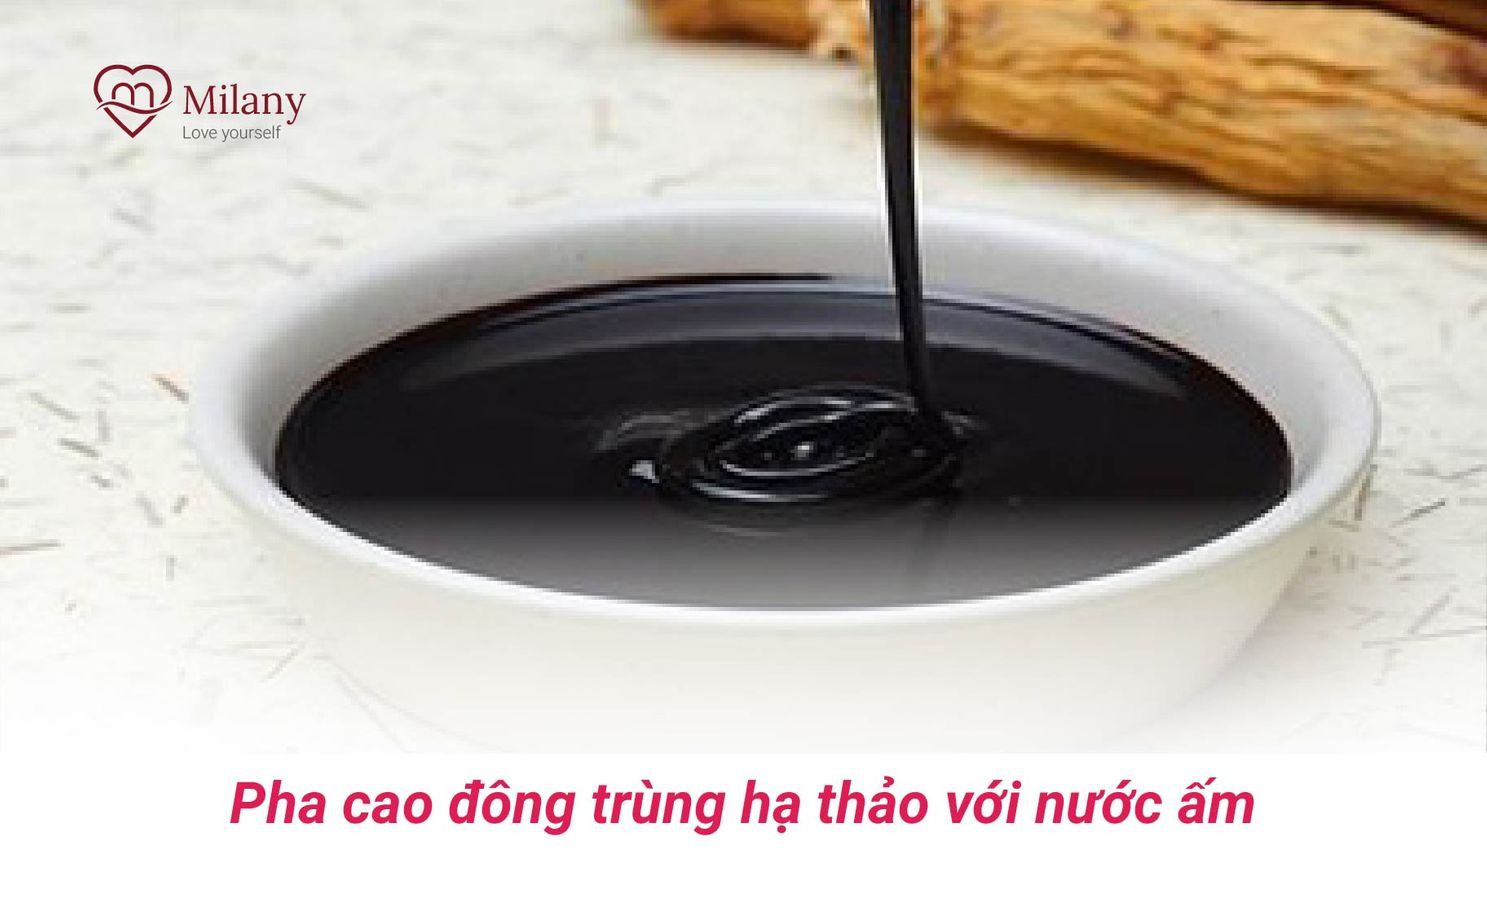 cach su dung cao dong trung ha thao